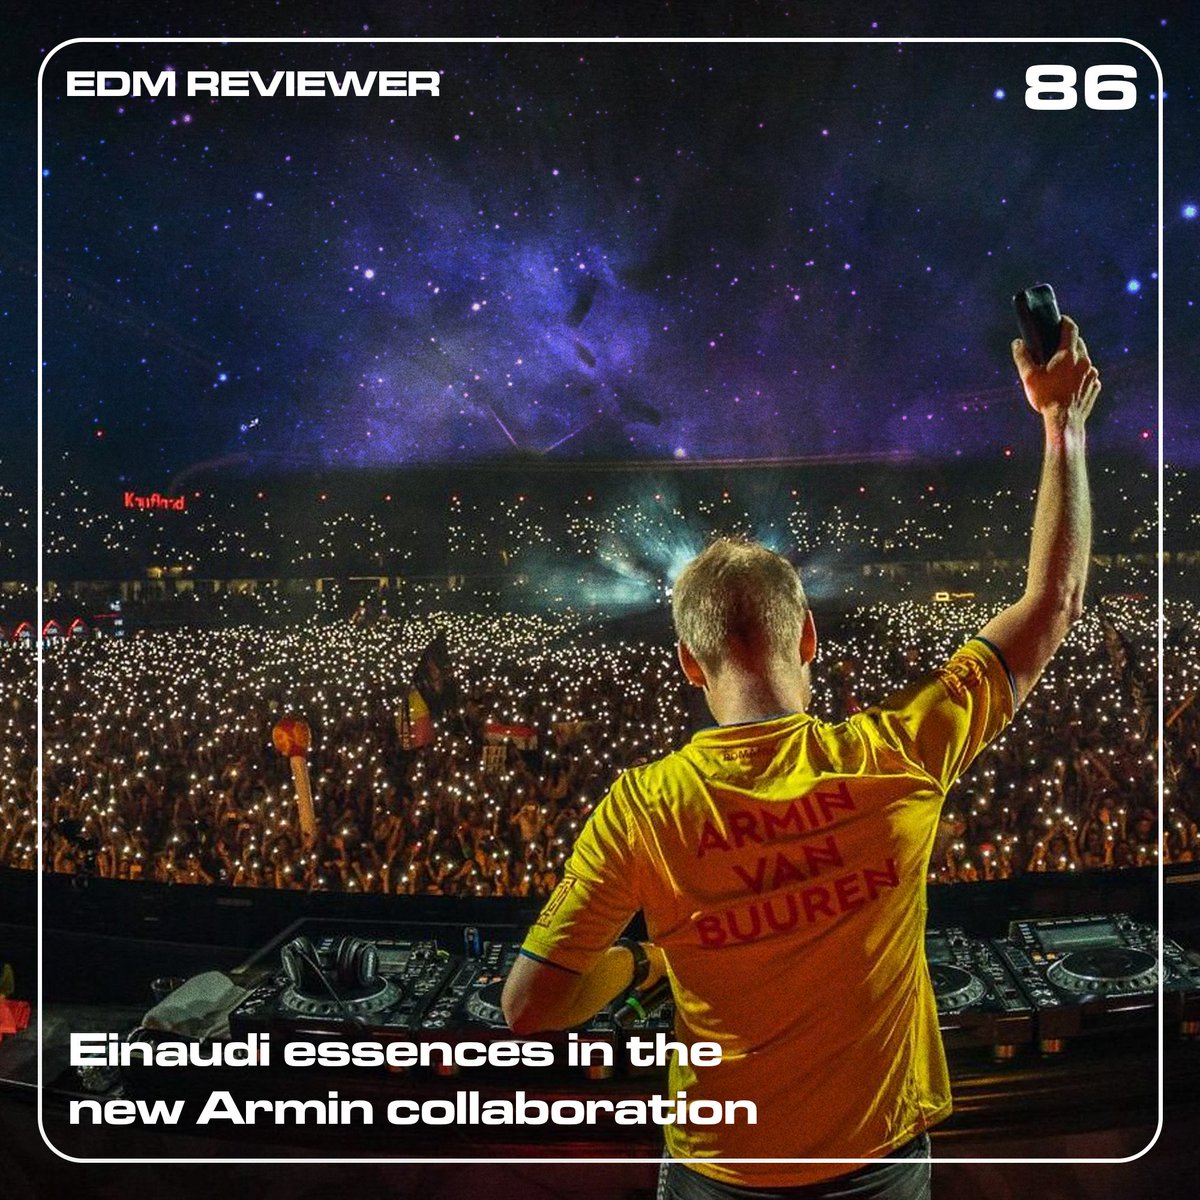 🌌 @arminvanbuuren presents Rising Star feat. @AlexandraBadoi – Cosmos ➡️ 86/100 • Heavenly break section • Sweet vocal by Alexandra Badoi • Trance at its best READ THE REVIEW HERE ⬇️ ow.ly/80aA50vpcbN